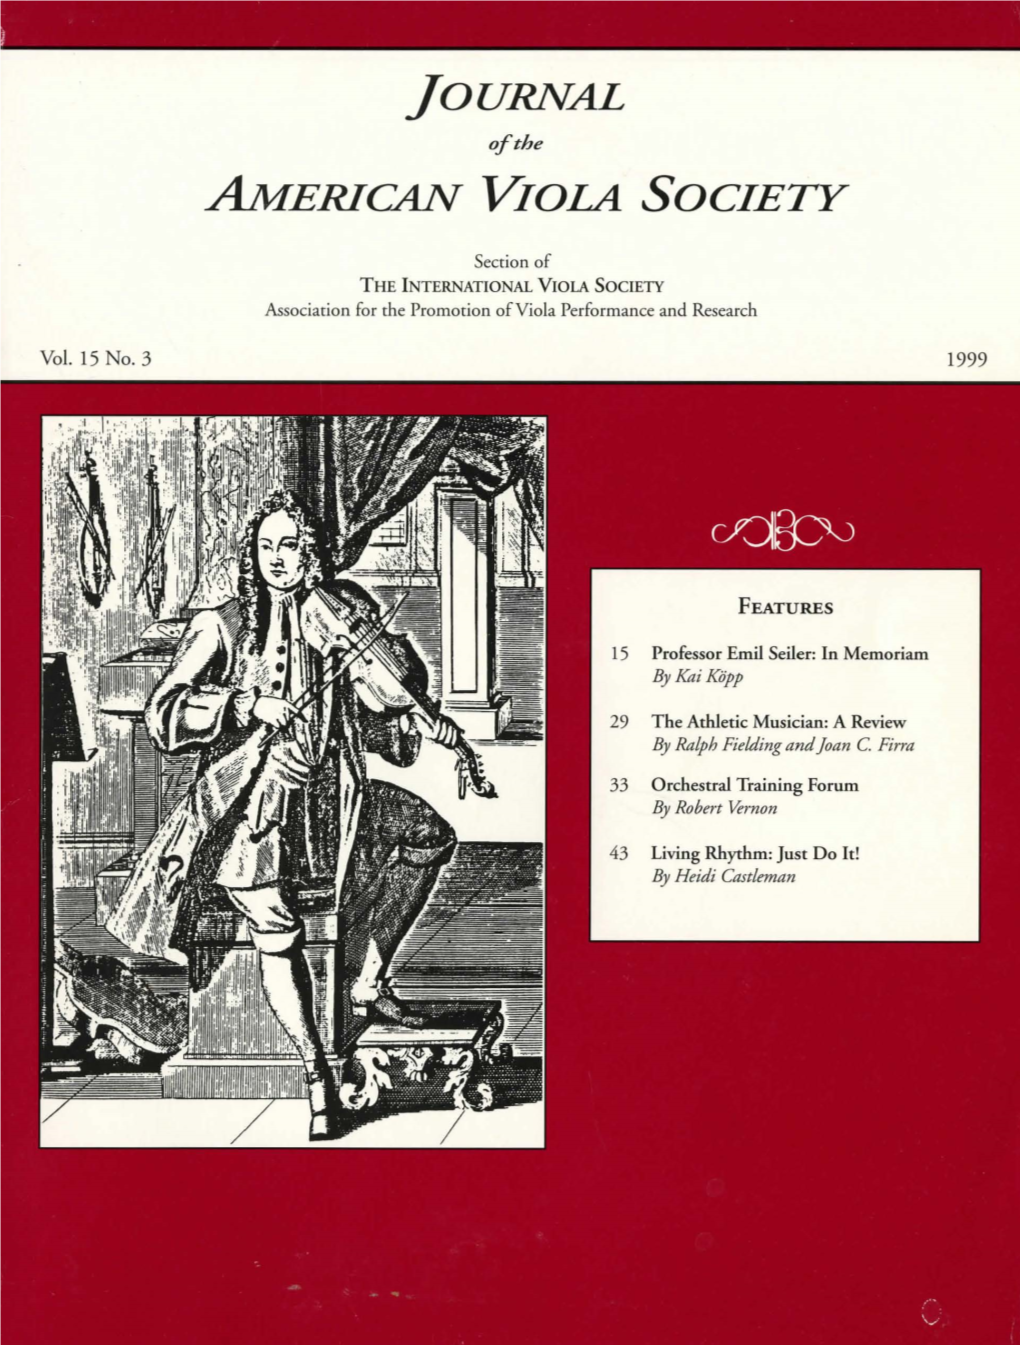 Journal of the American Viola Society Volume 15 No. 3, 1999